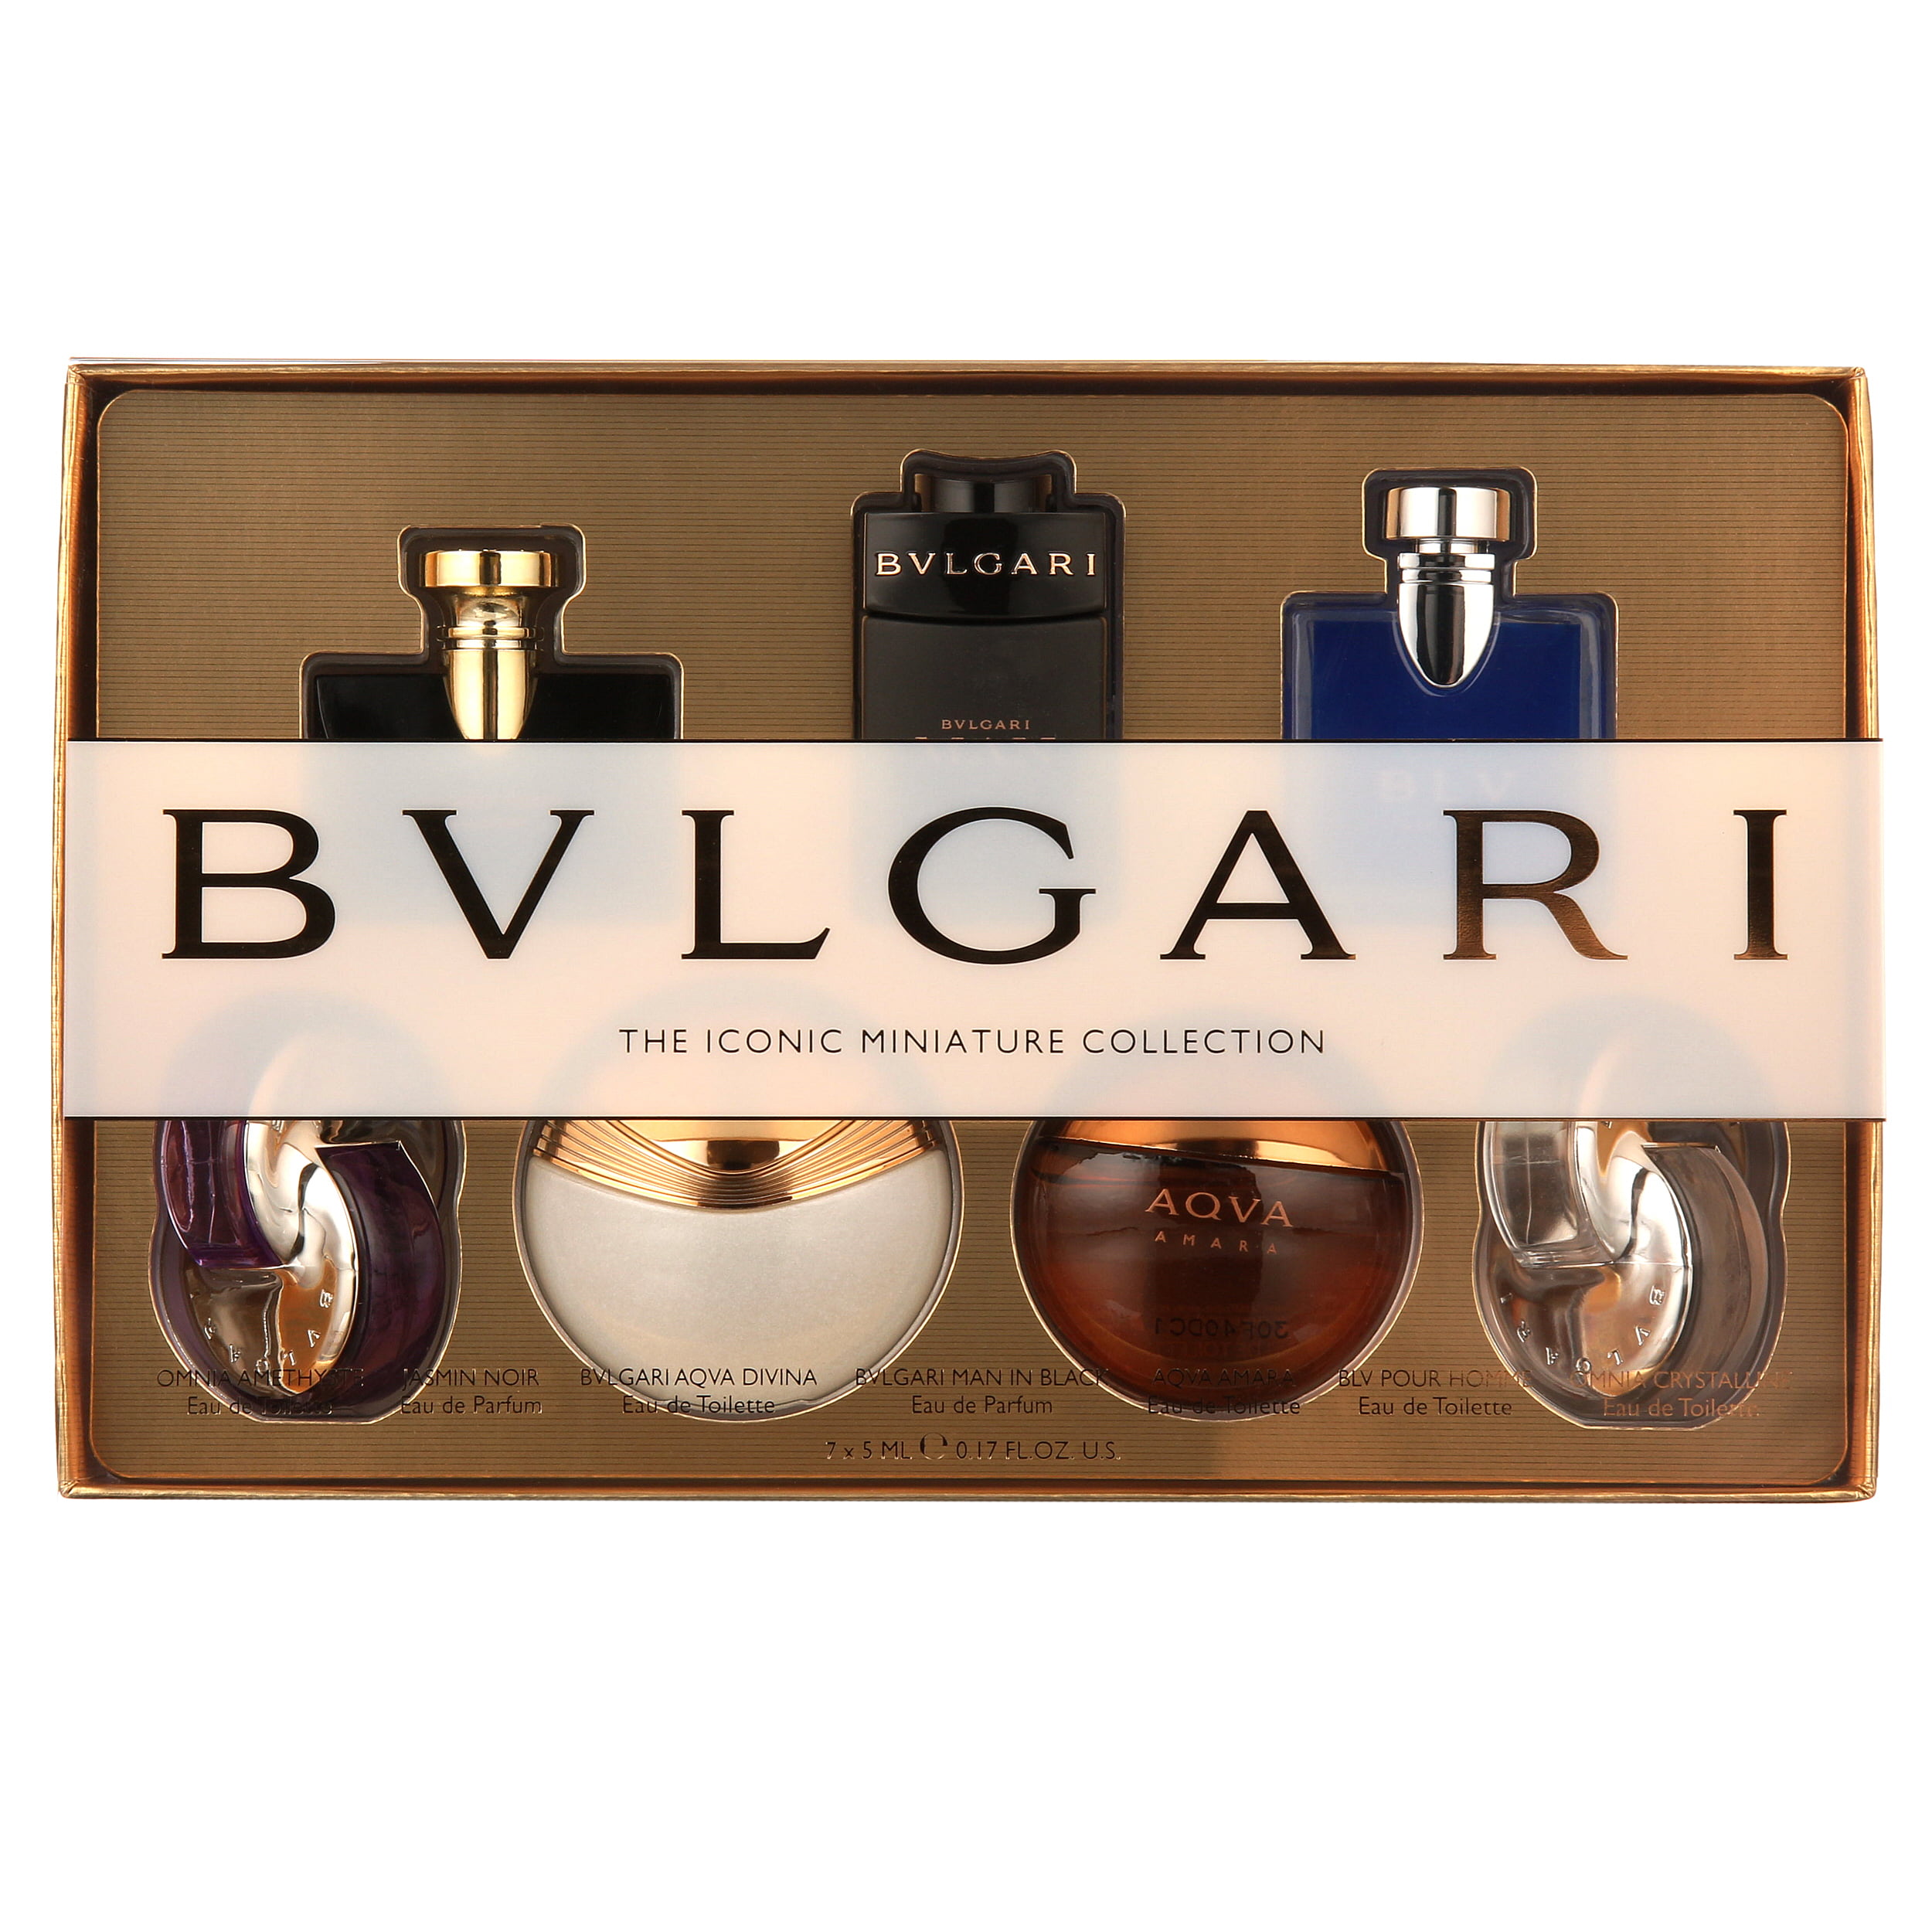 Bvlgari The Iconic Miniature Collection 